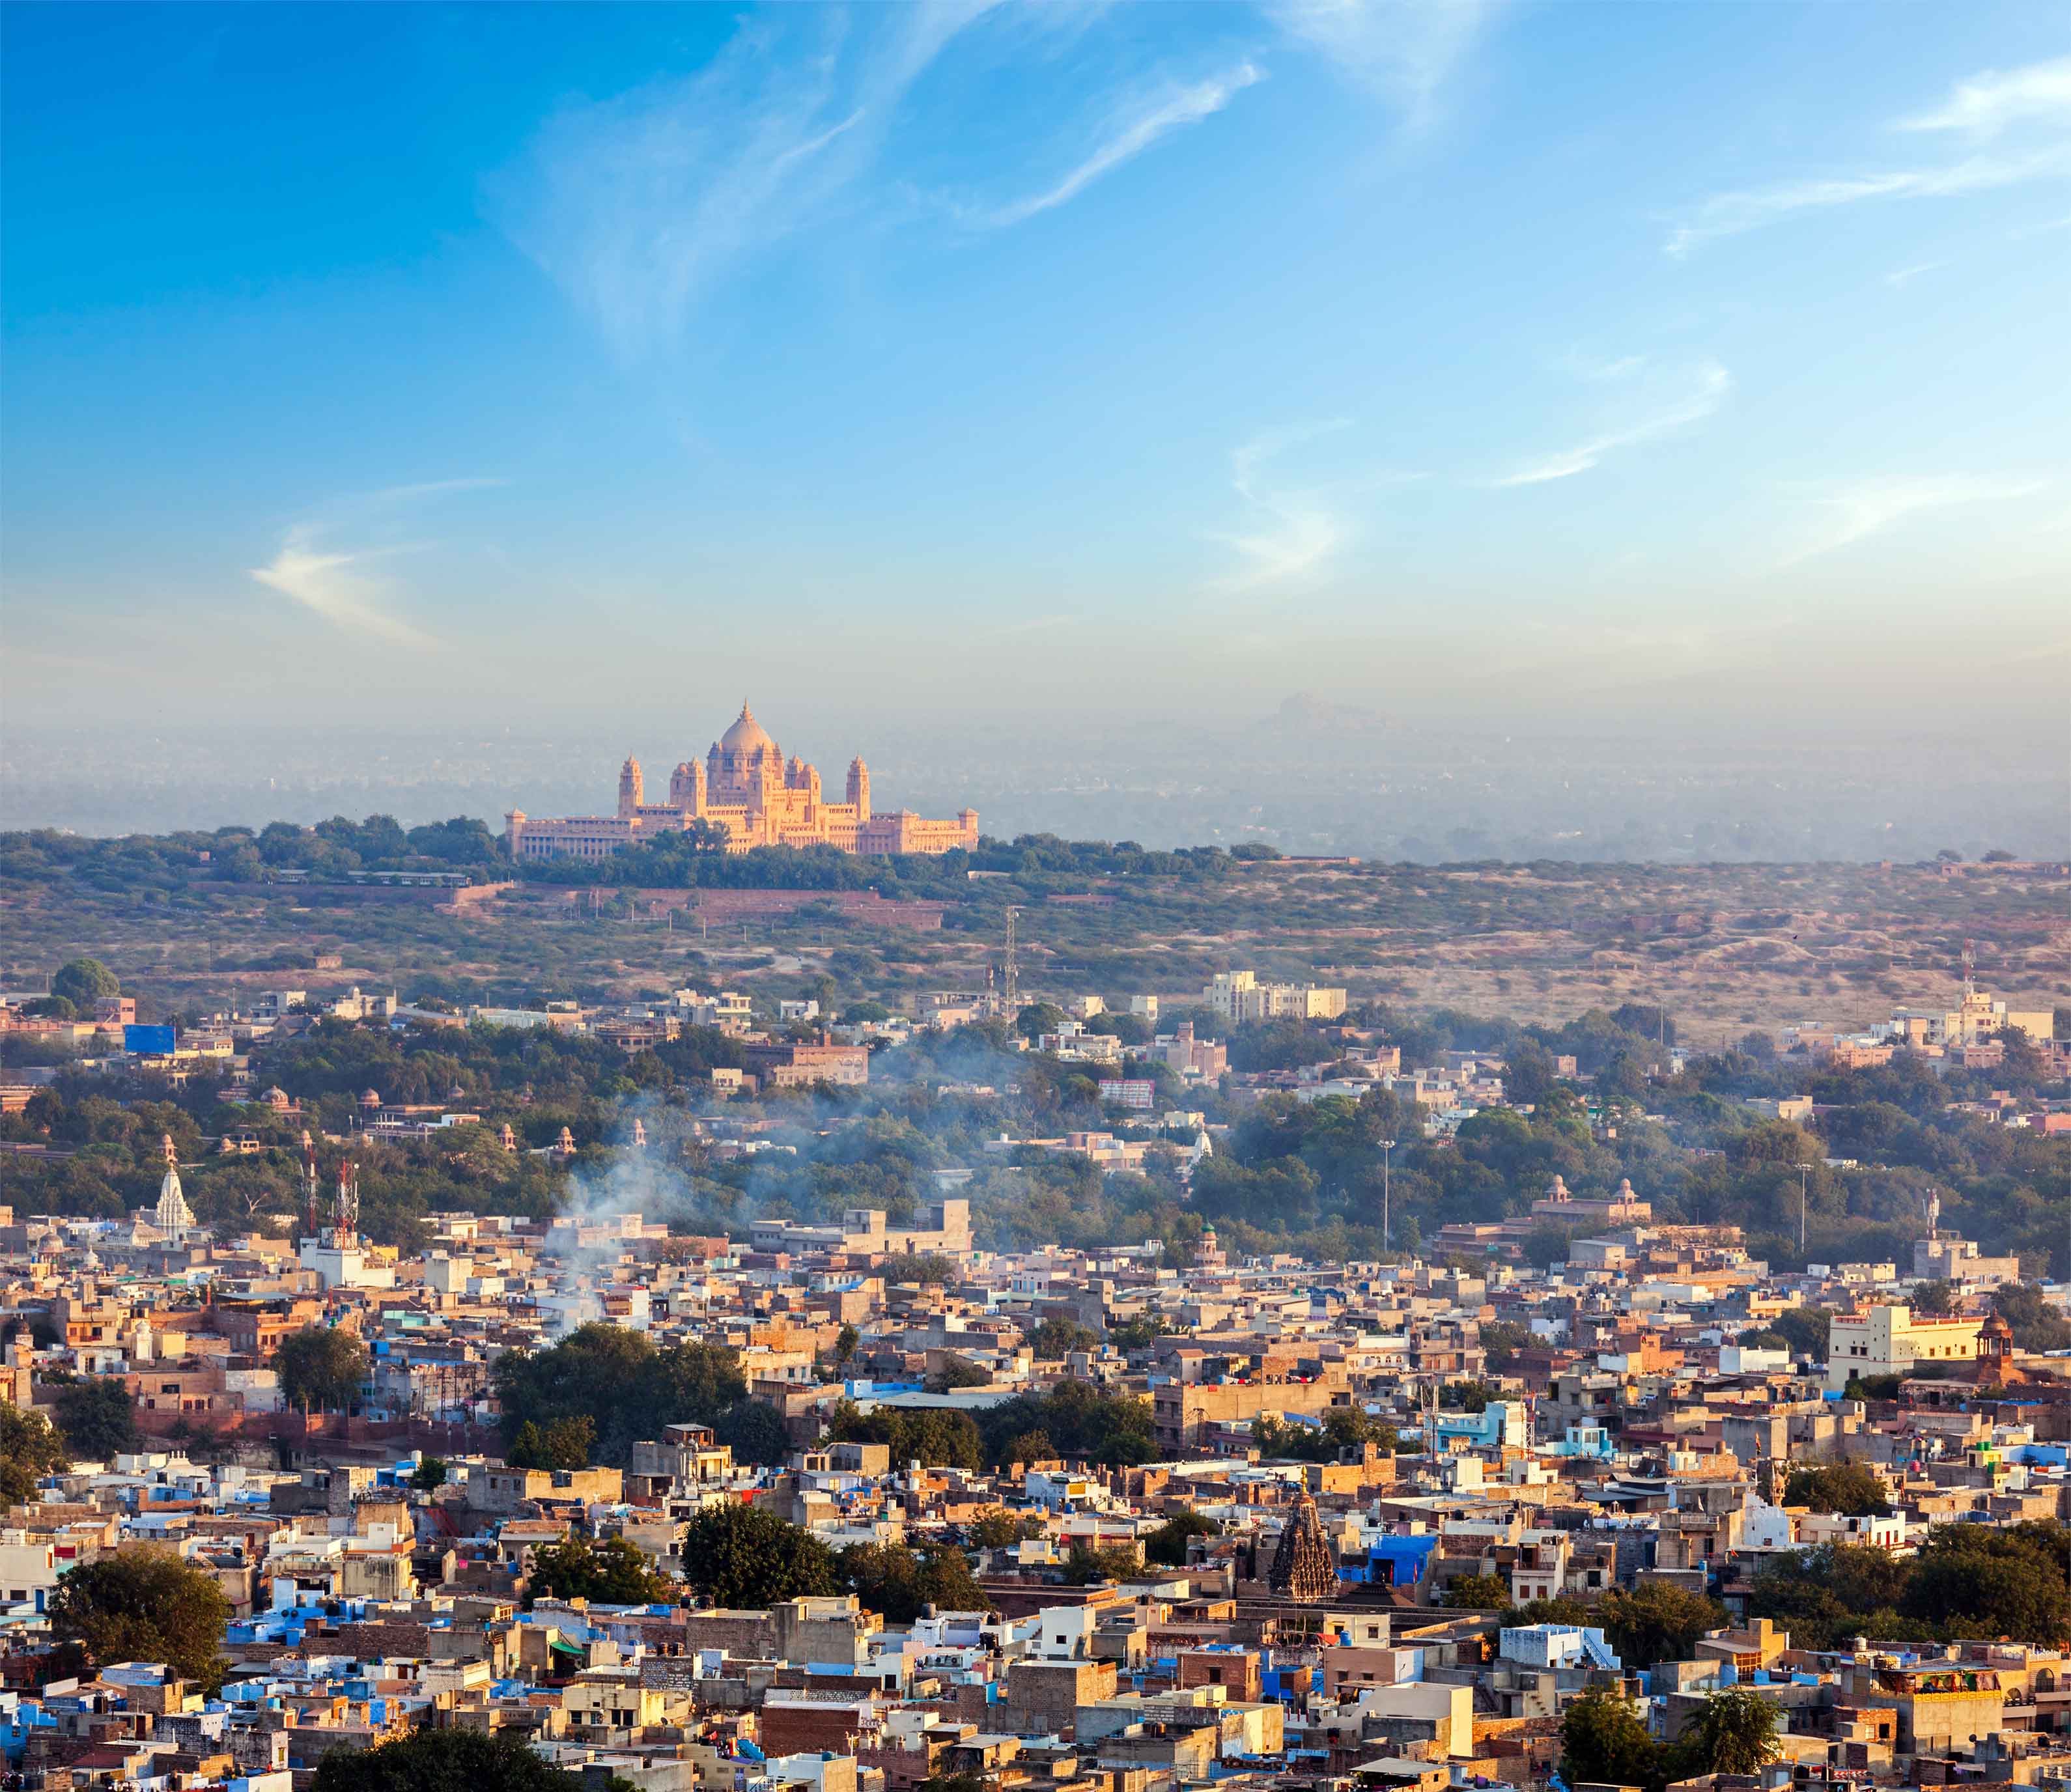 The building from afar is Umaid Bhawan Palace, one of the world's largest private residences. 